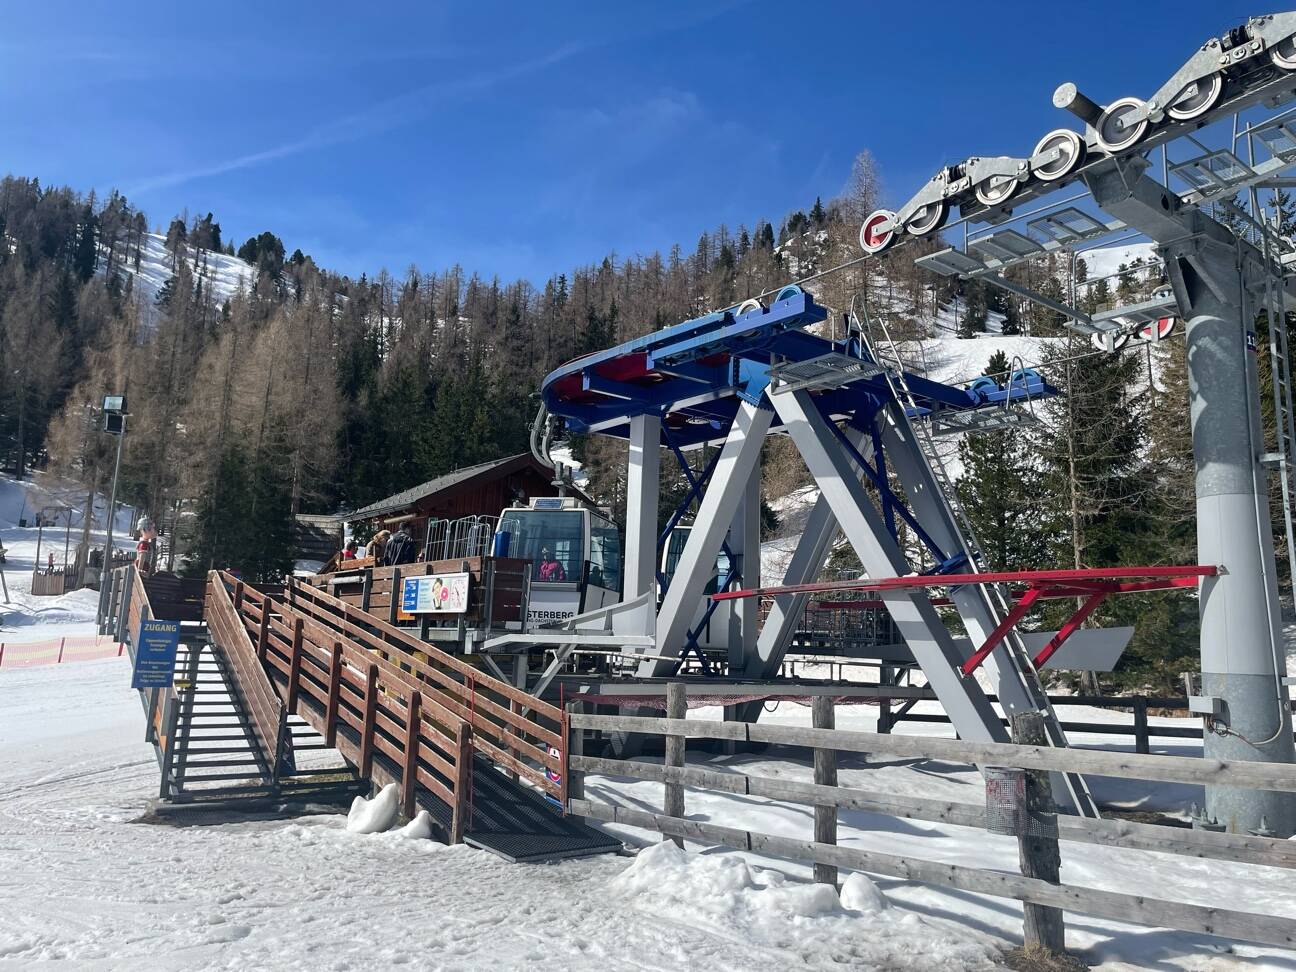 Courtesy Photo 
This photo shows a gondola in Austria recently purchased by the City and Borough of Juneau for the Eaglecrest Ski Area.